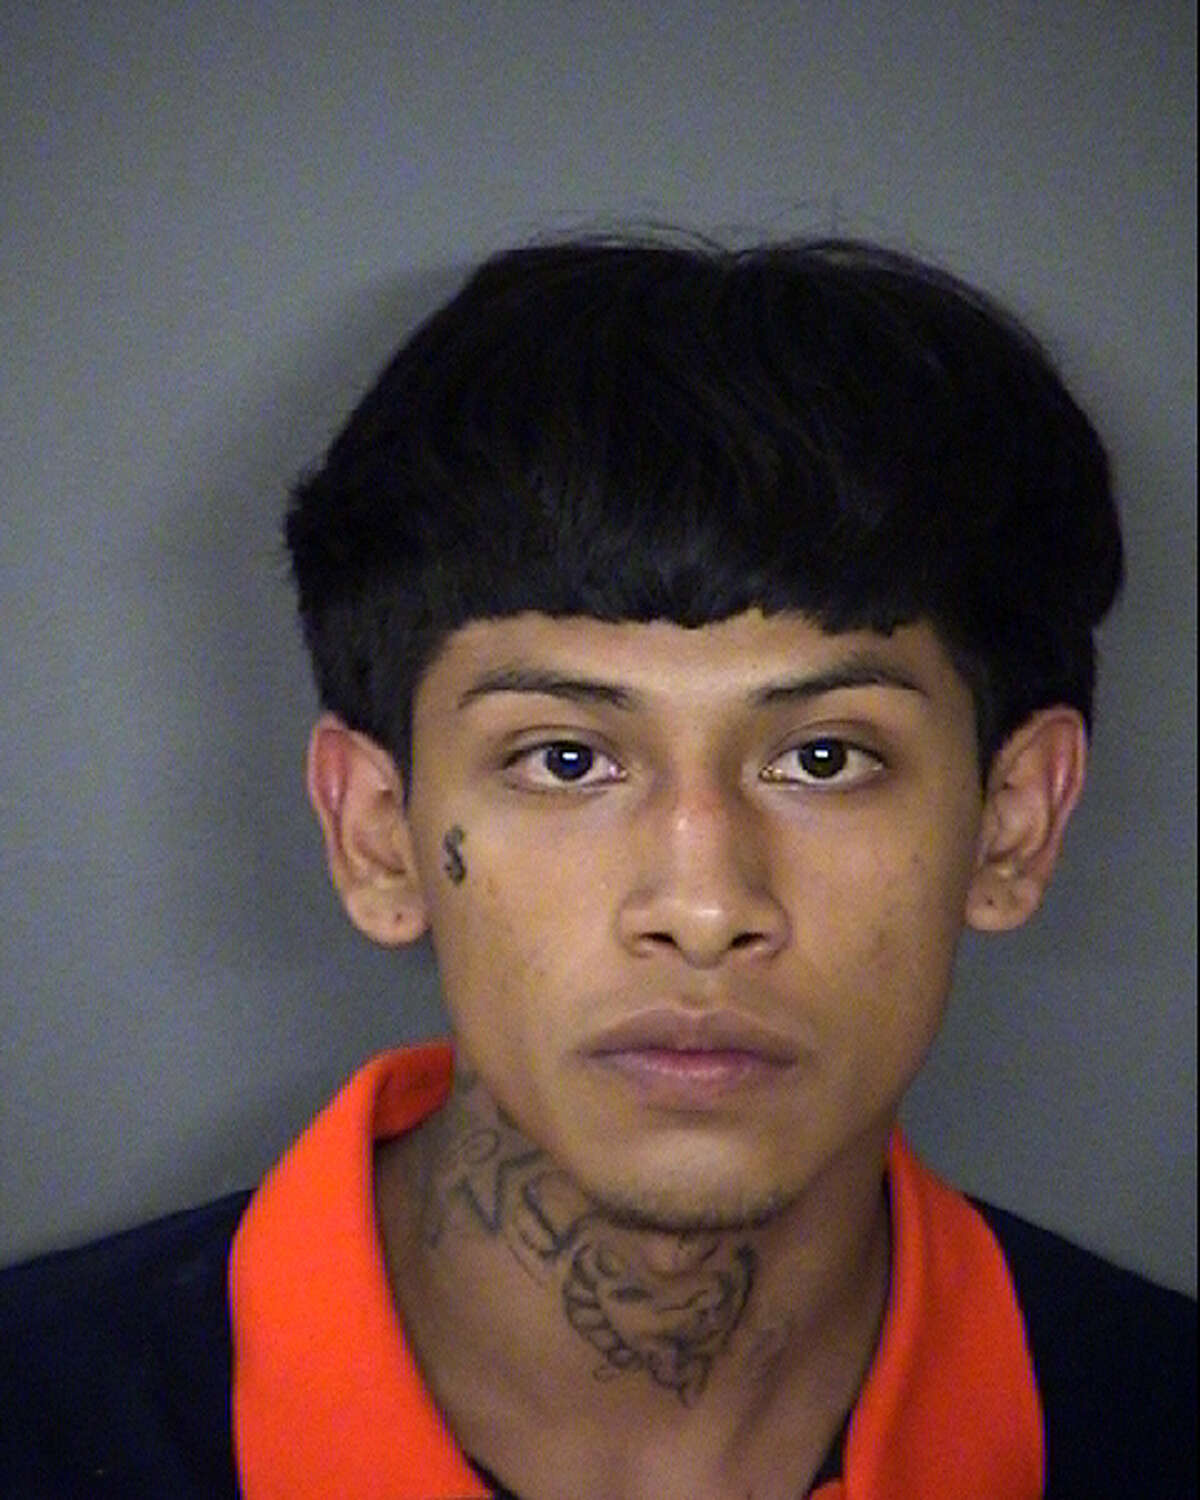 Jose Felinzo Carrion, 18, was booked into the Bexar County Jail on a murder charge on Sept. 27. His bond was set at $100,000.